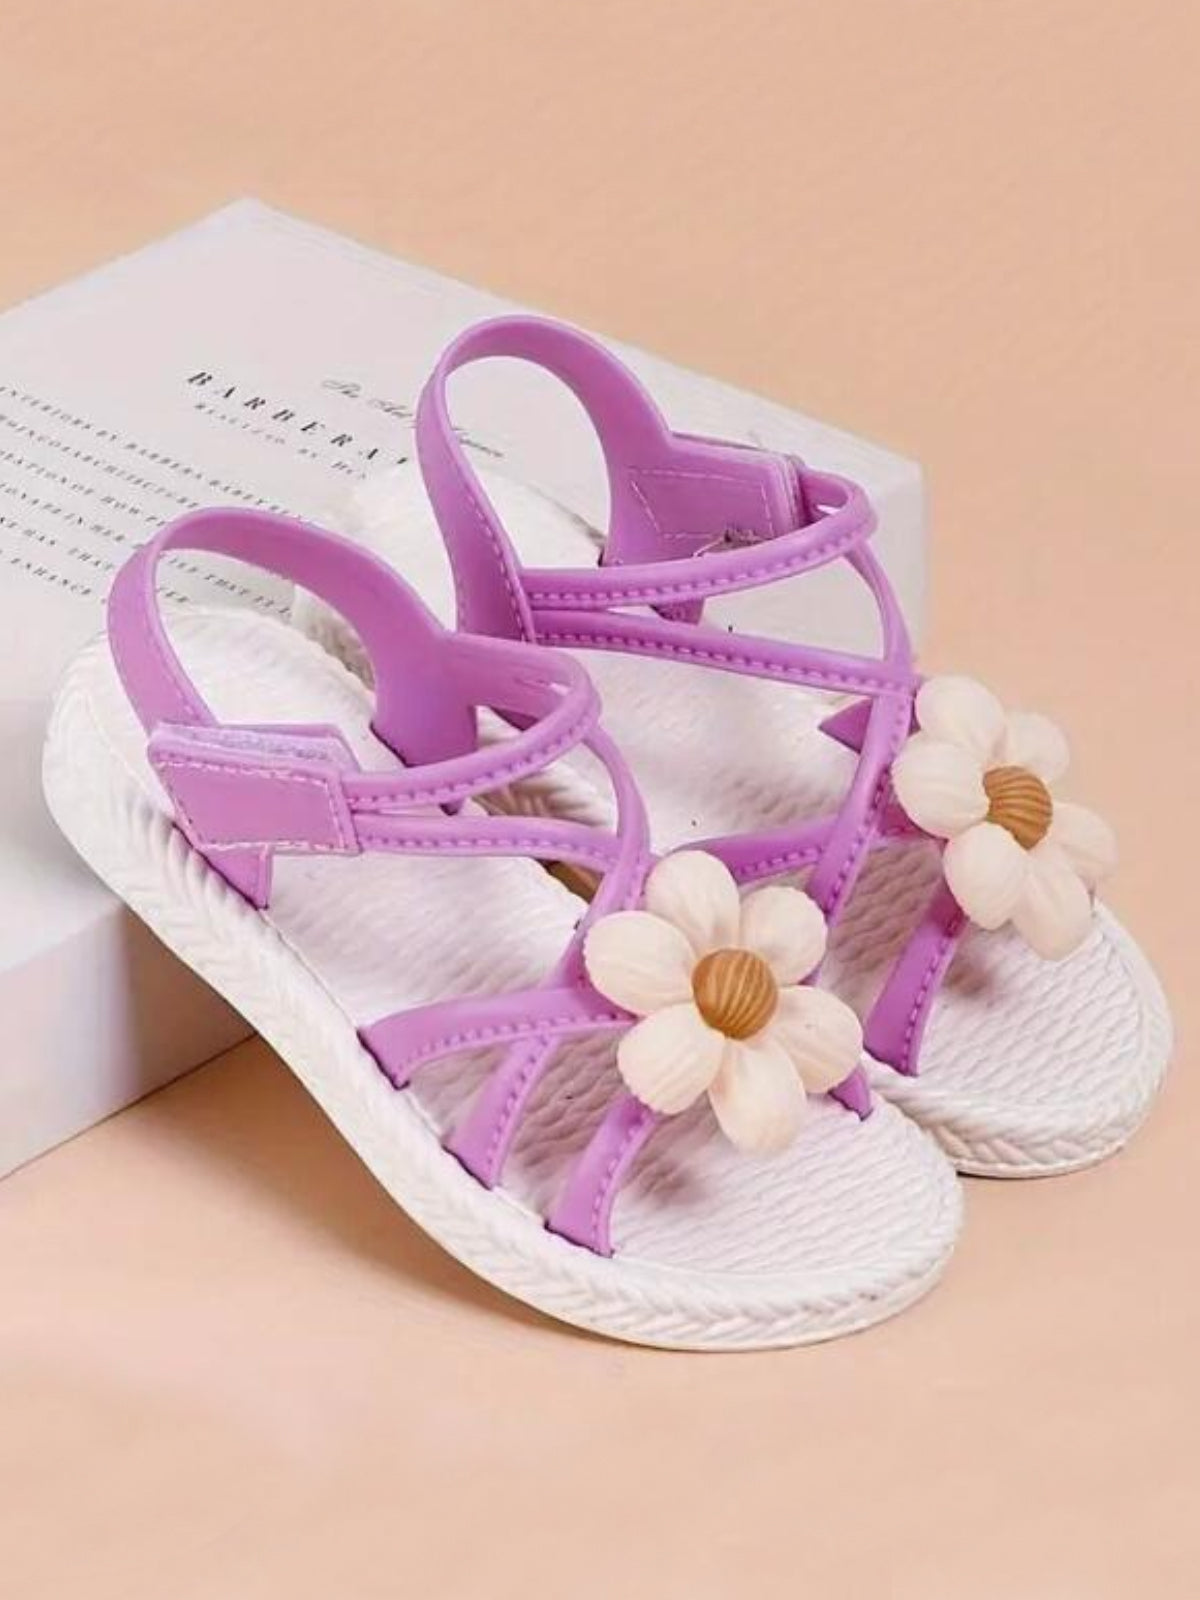 Charming Girls' Floral Sandals with Cute Daisy Design By Liv and Mia